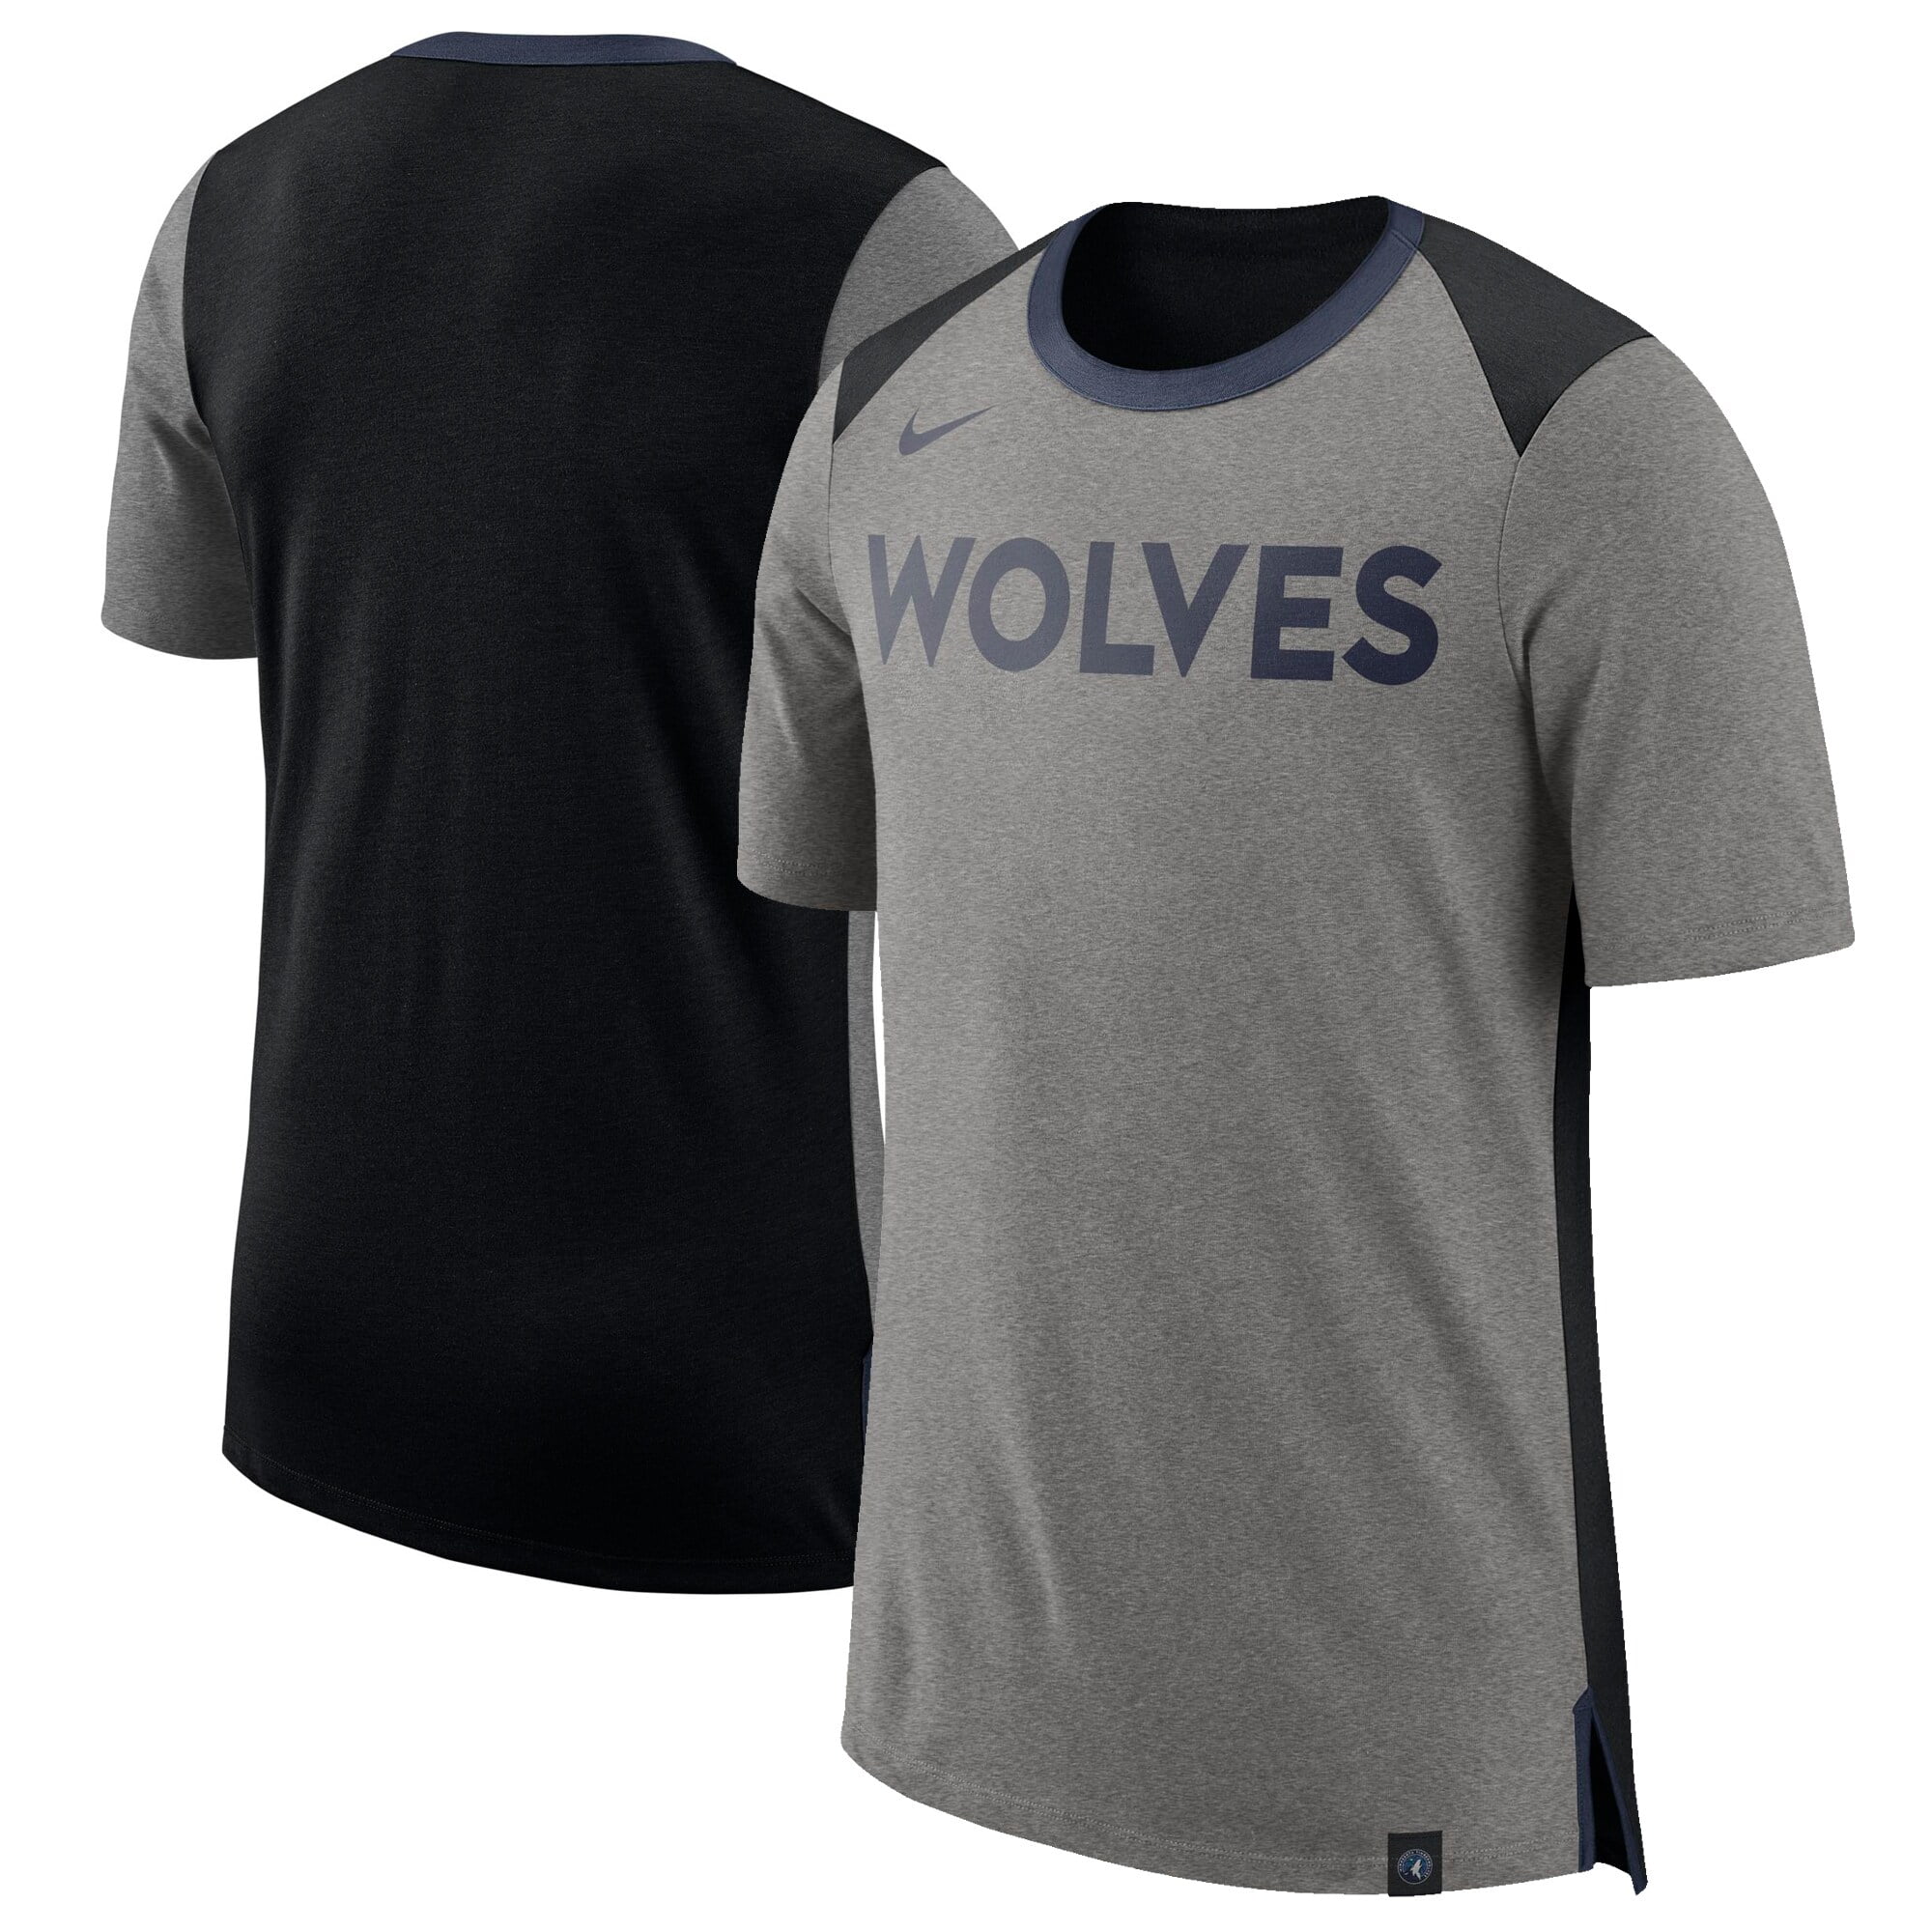 wolves jersey gray